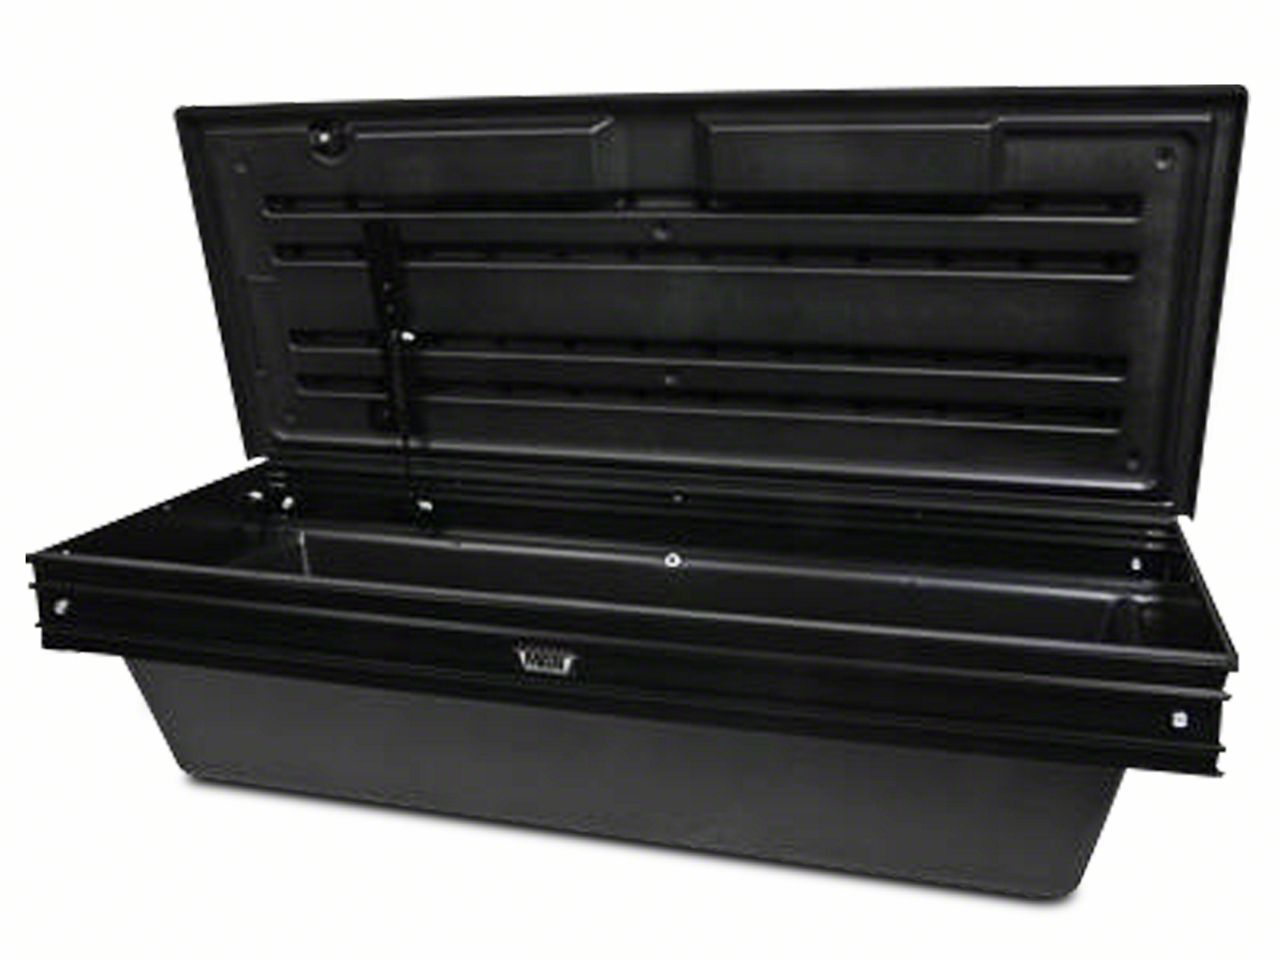 Ram3500 Tool Boxes & Bed Storage 2010-2018